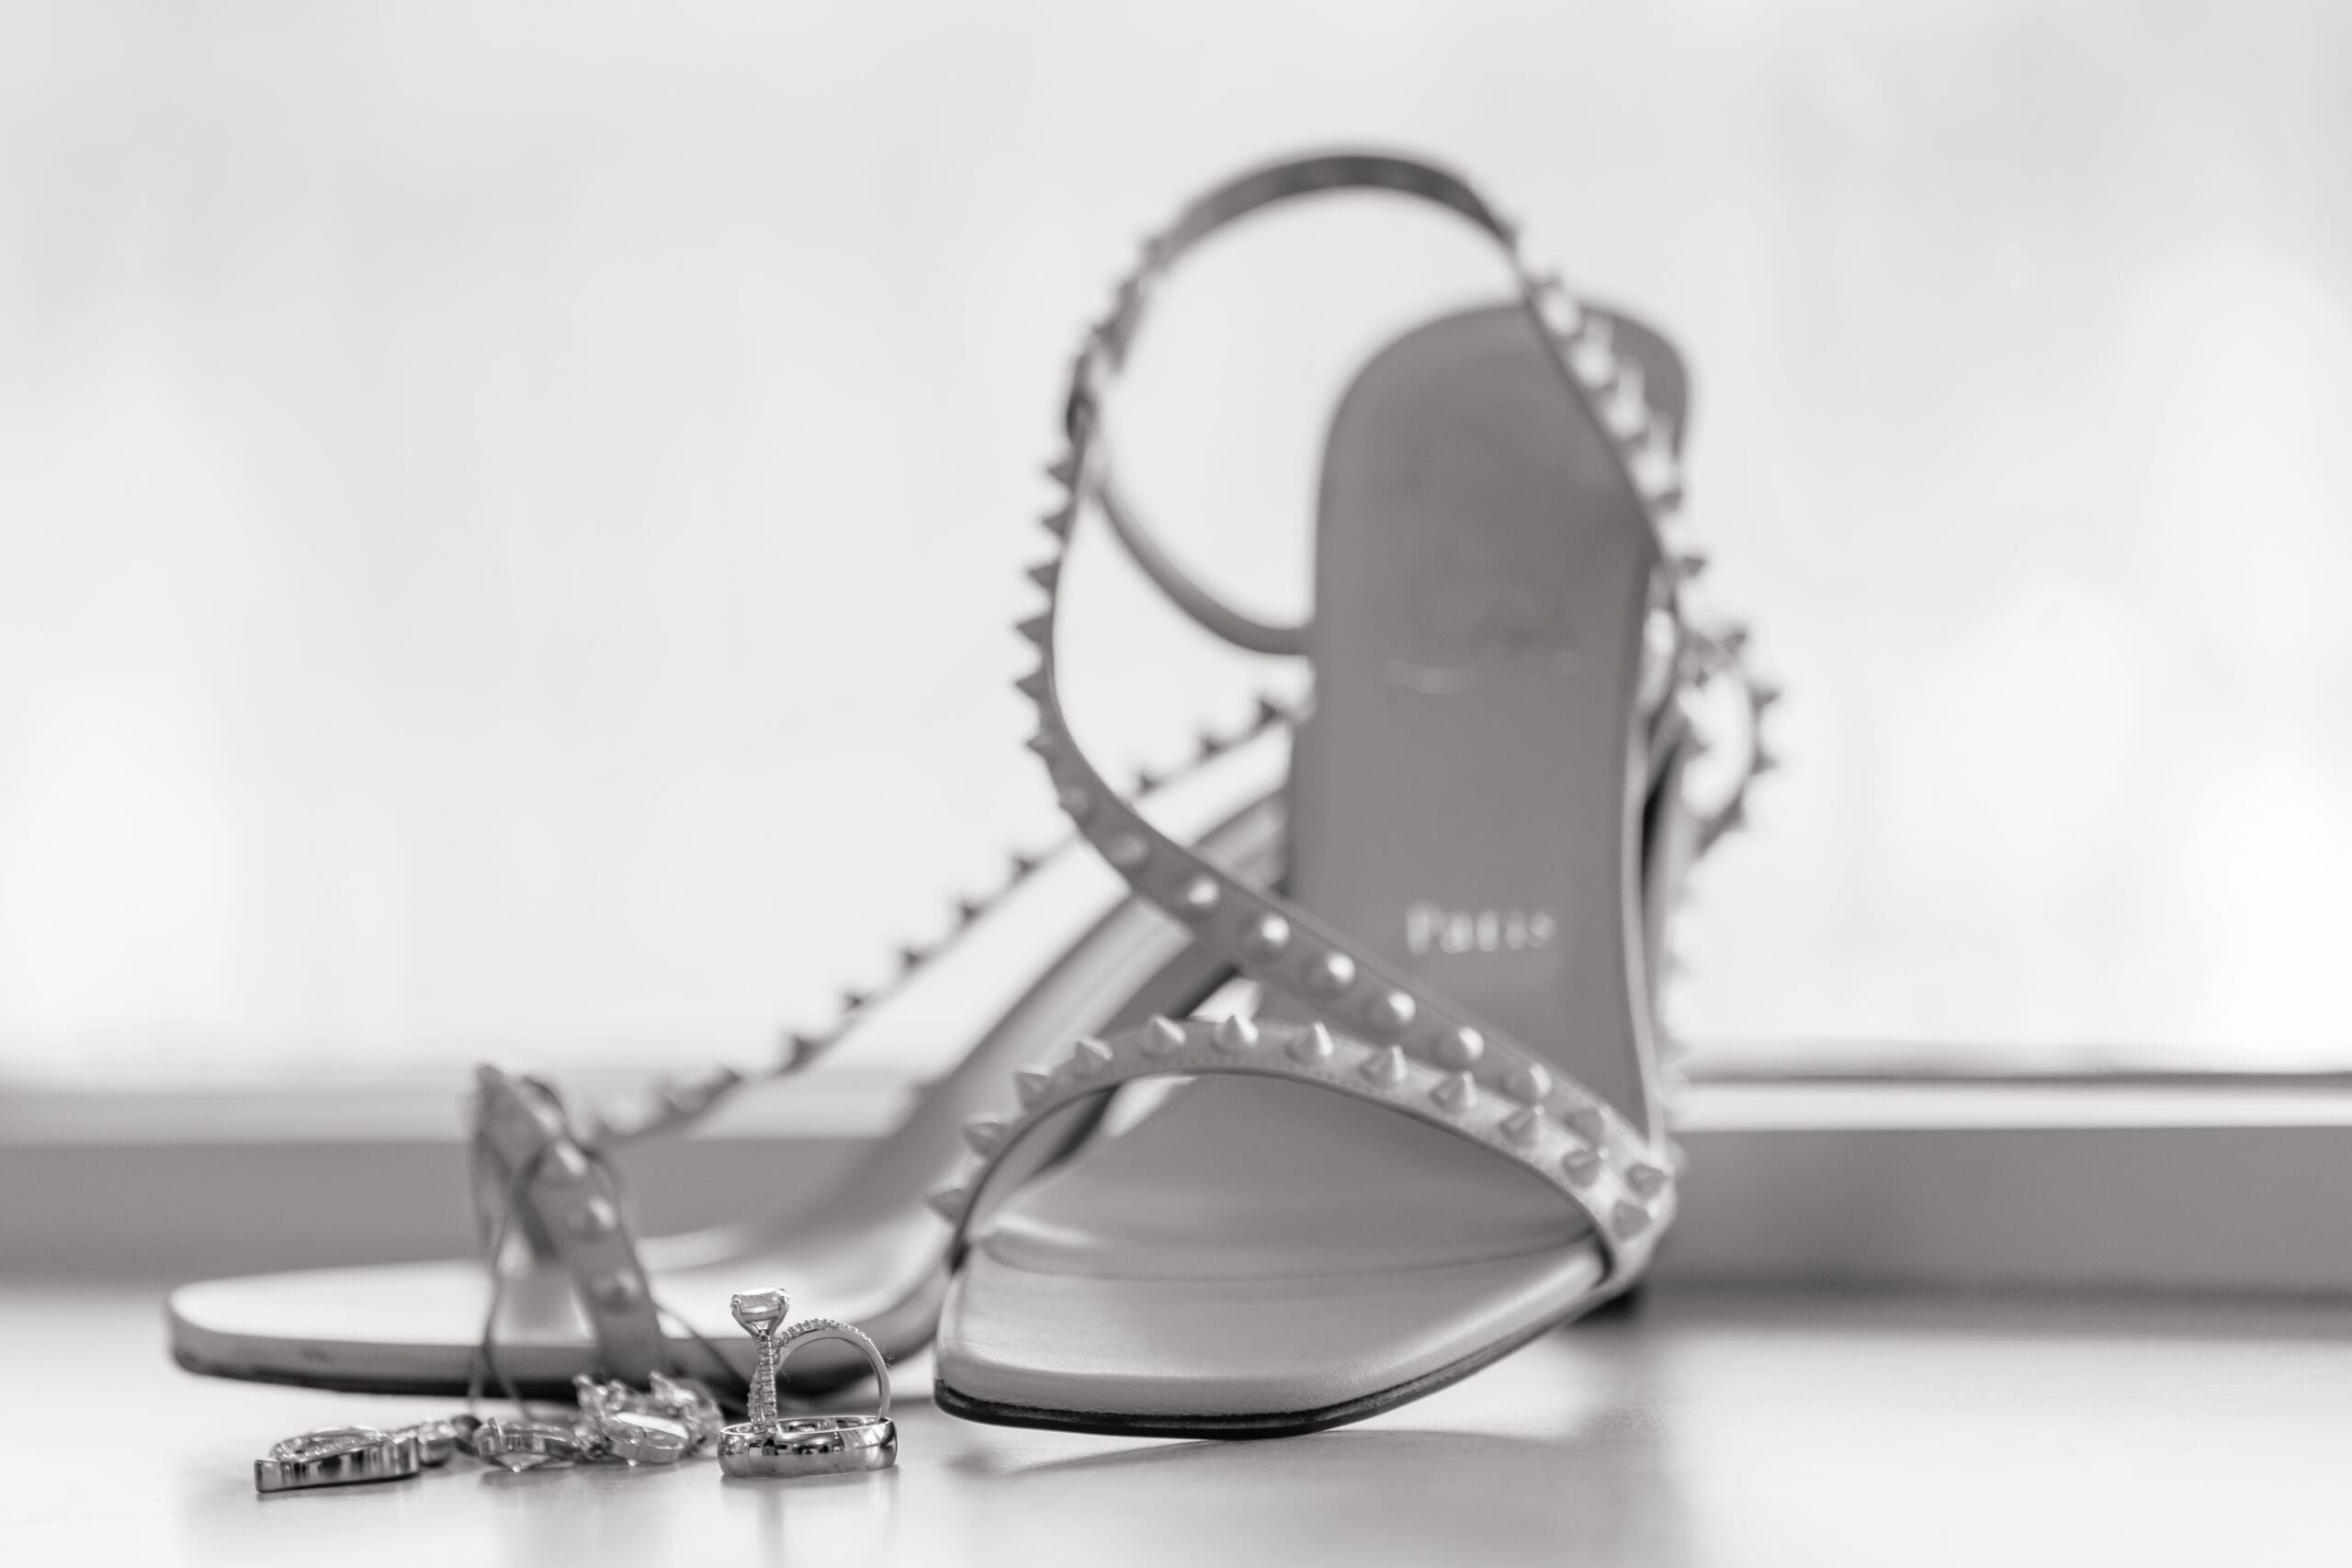 Black and white photo of Lateisha's heels, ring, and earrings.